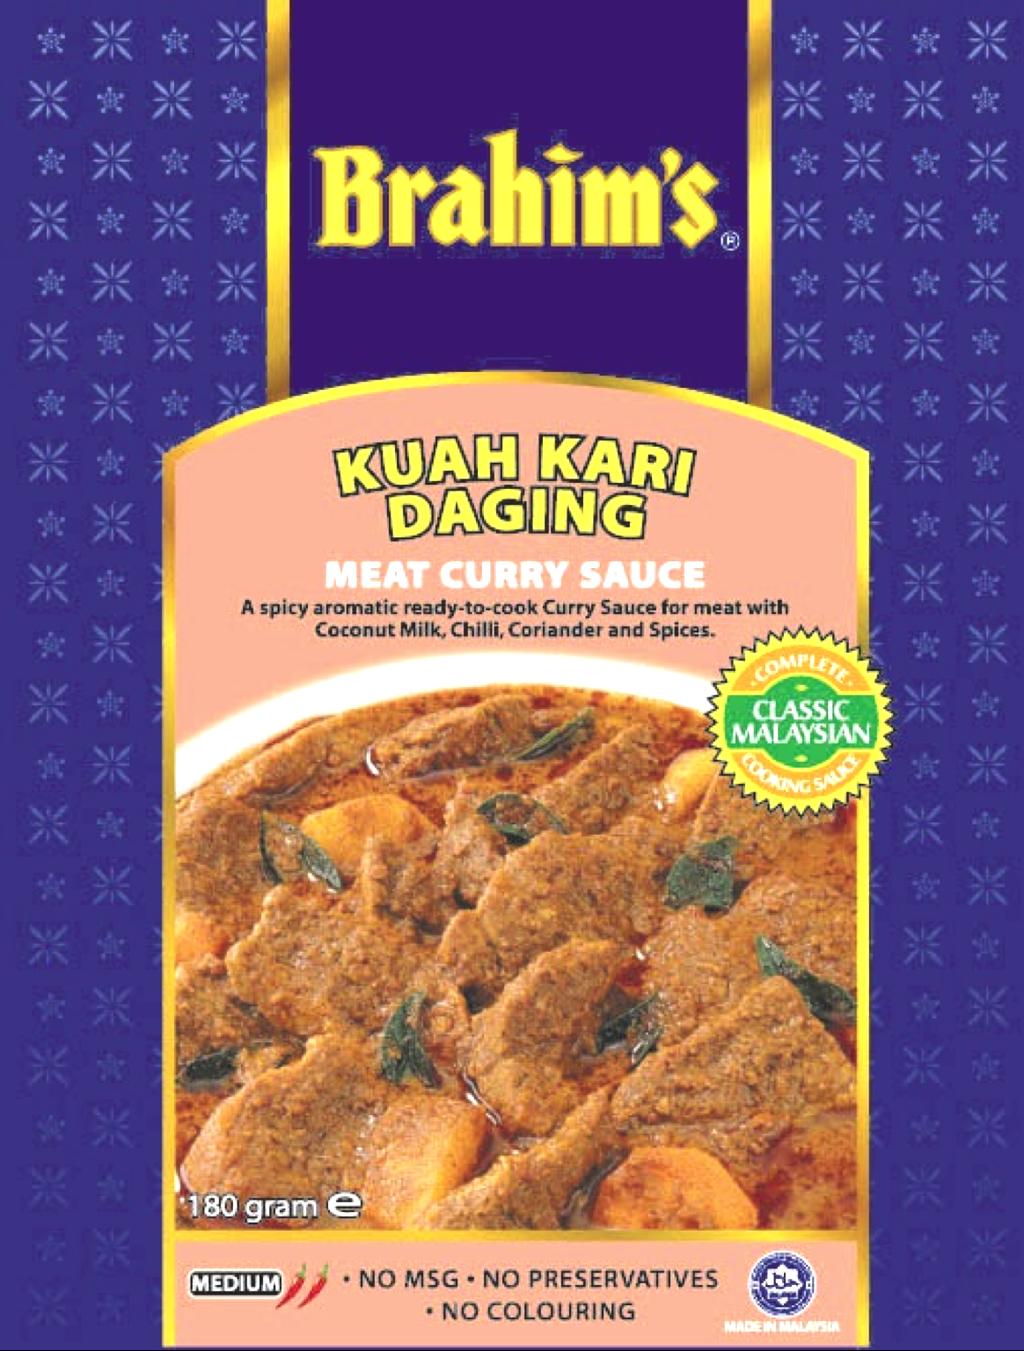 BRAHIM'S READY-TO-USE COOKING SAUCES - SPECIFICATIONS Units Meat Curry sauce Fish Curry Sauce Rendang Sauce Sambal Sauce Kurma Sauce Spicy Tomato Sauce Spicy tamrind sauce Creamy Coconut Sauce Pajeri